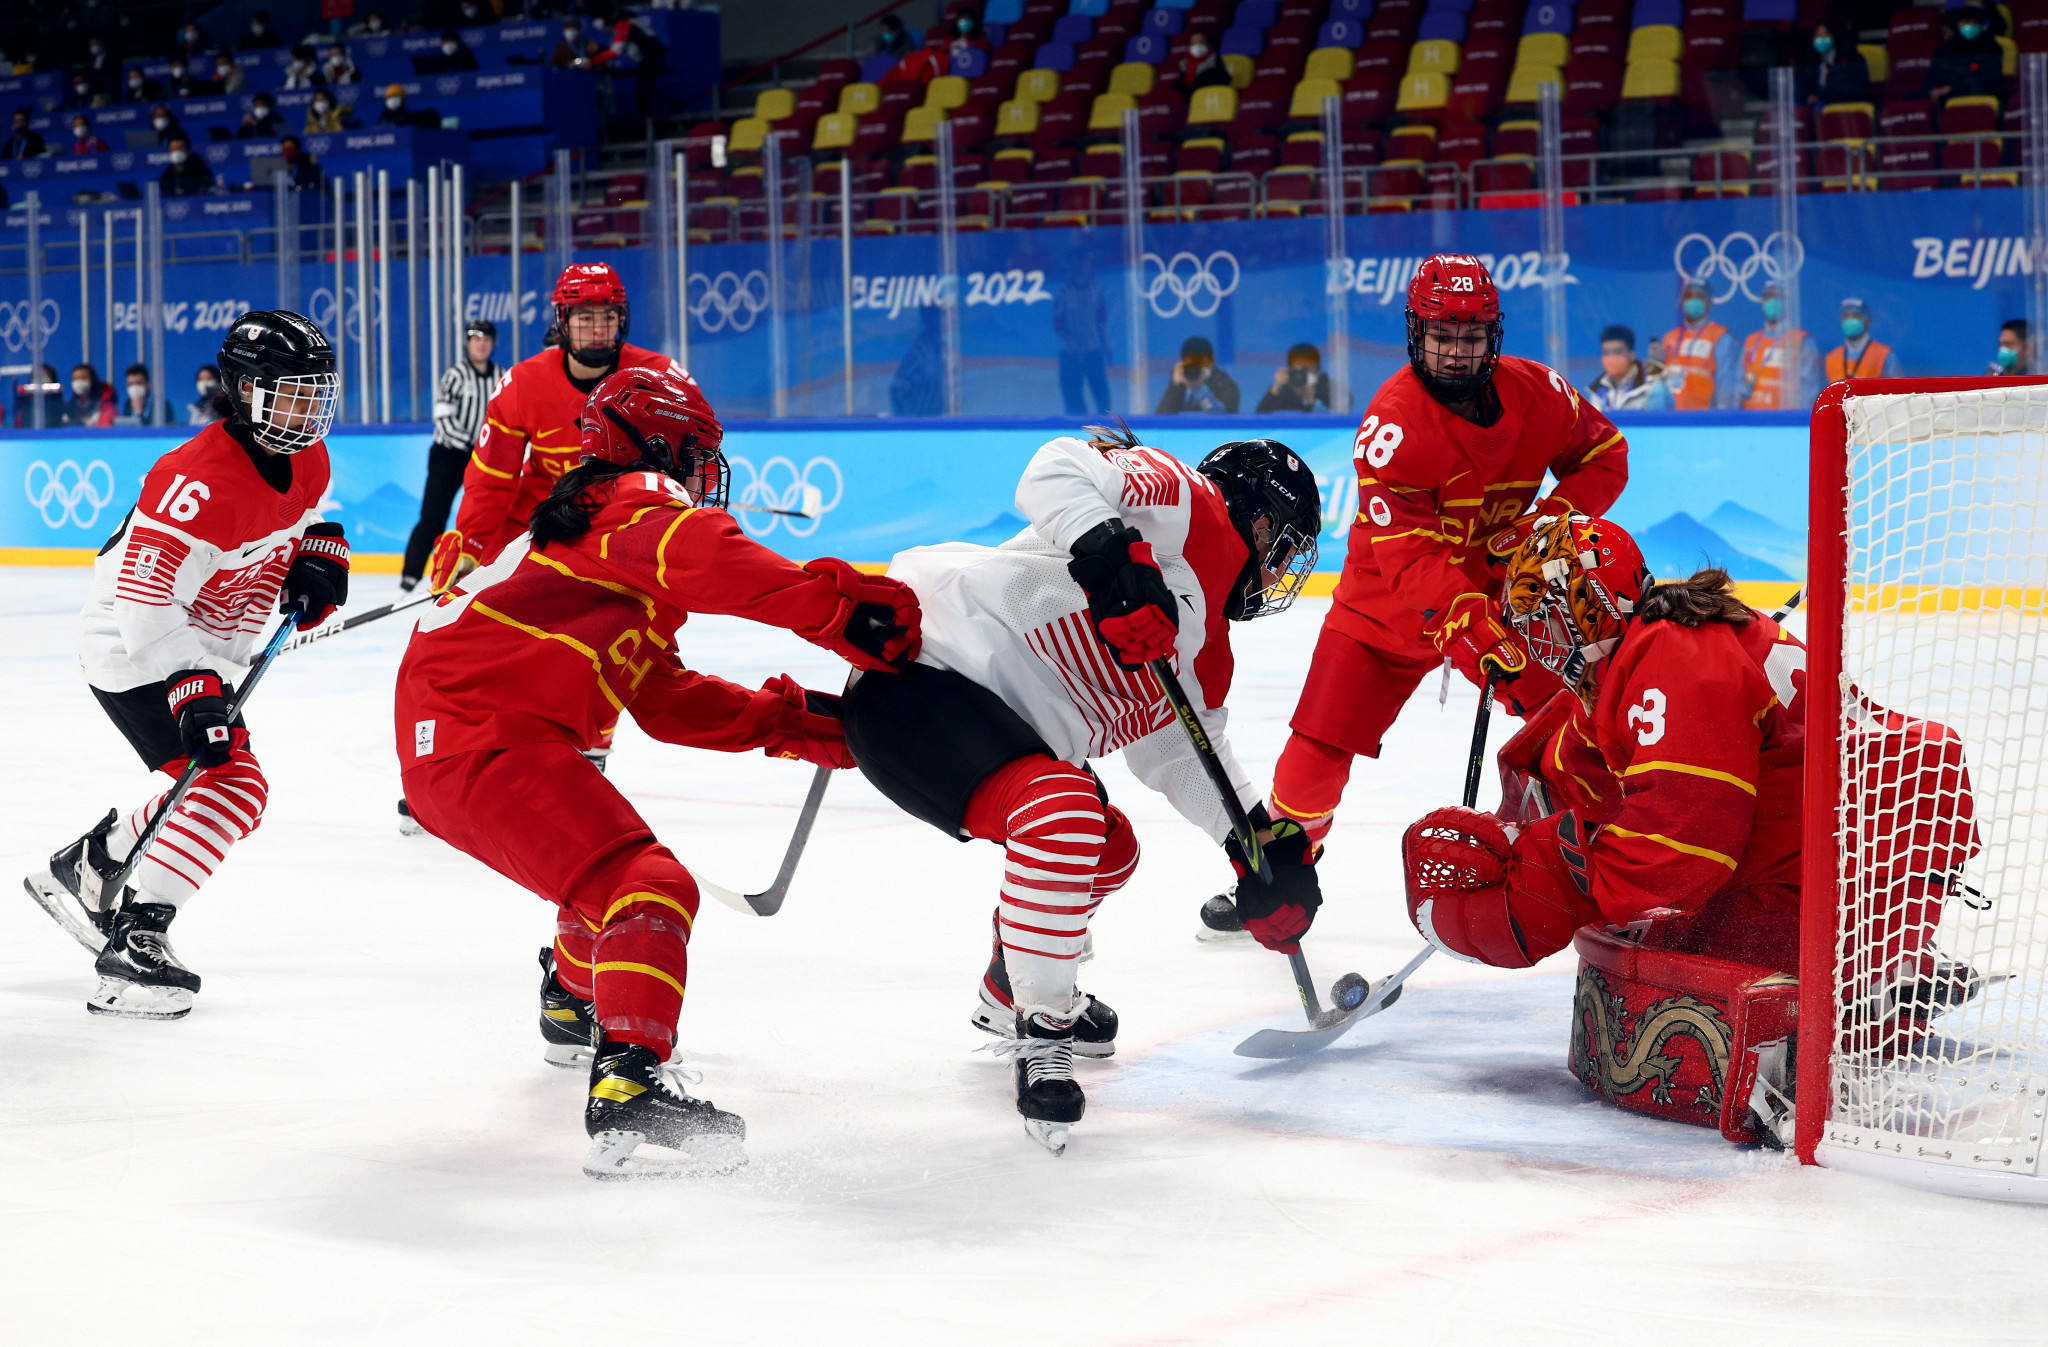 Film star Wu Jing has become ice hockey’s first ambassador in China as the sport tries to build on the interest created by the 2022 Winter Olympic Games in Beijing ©Getty Images